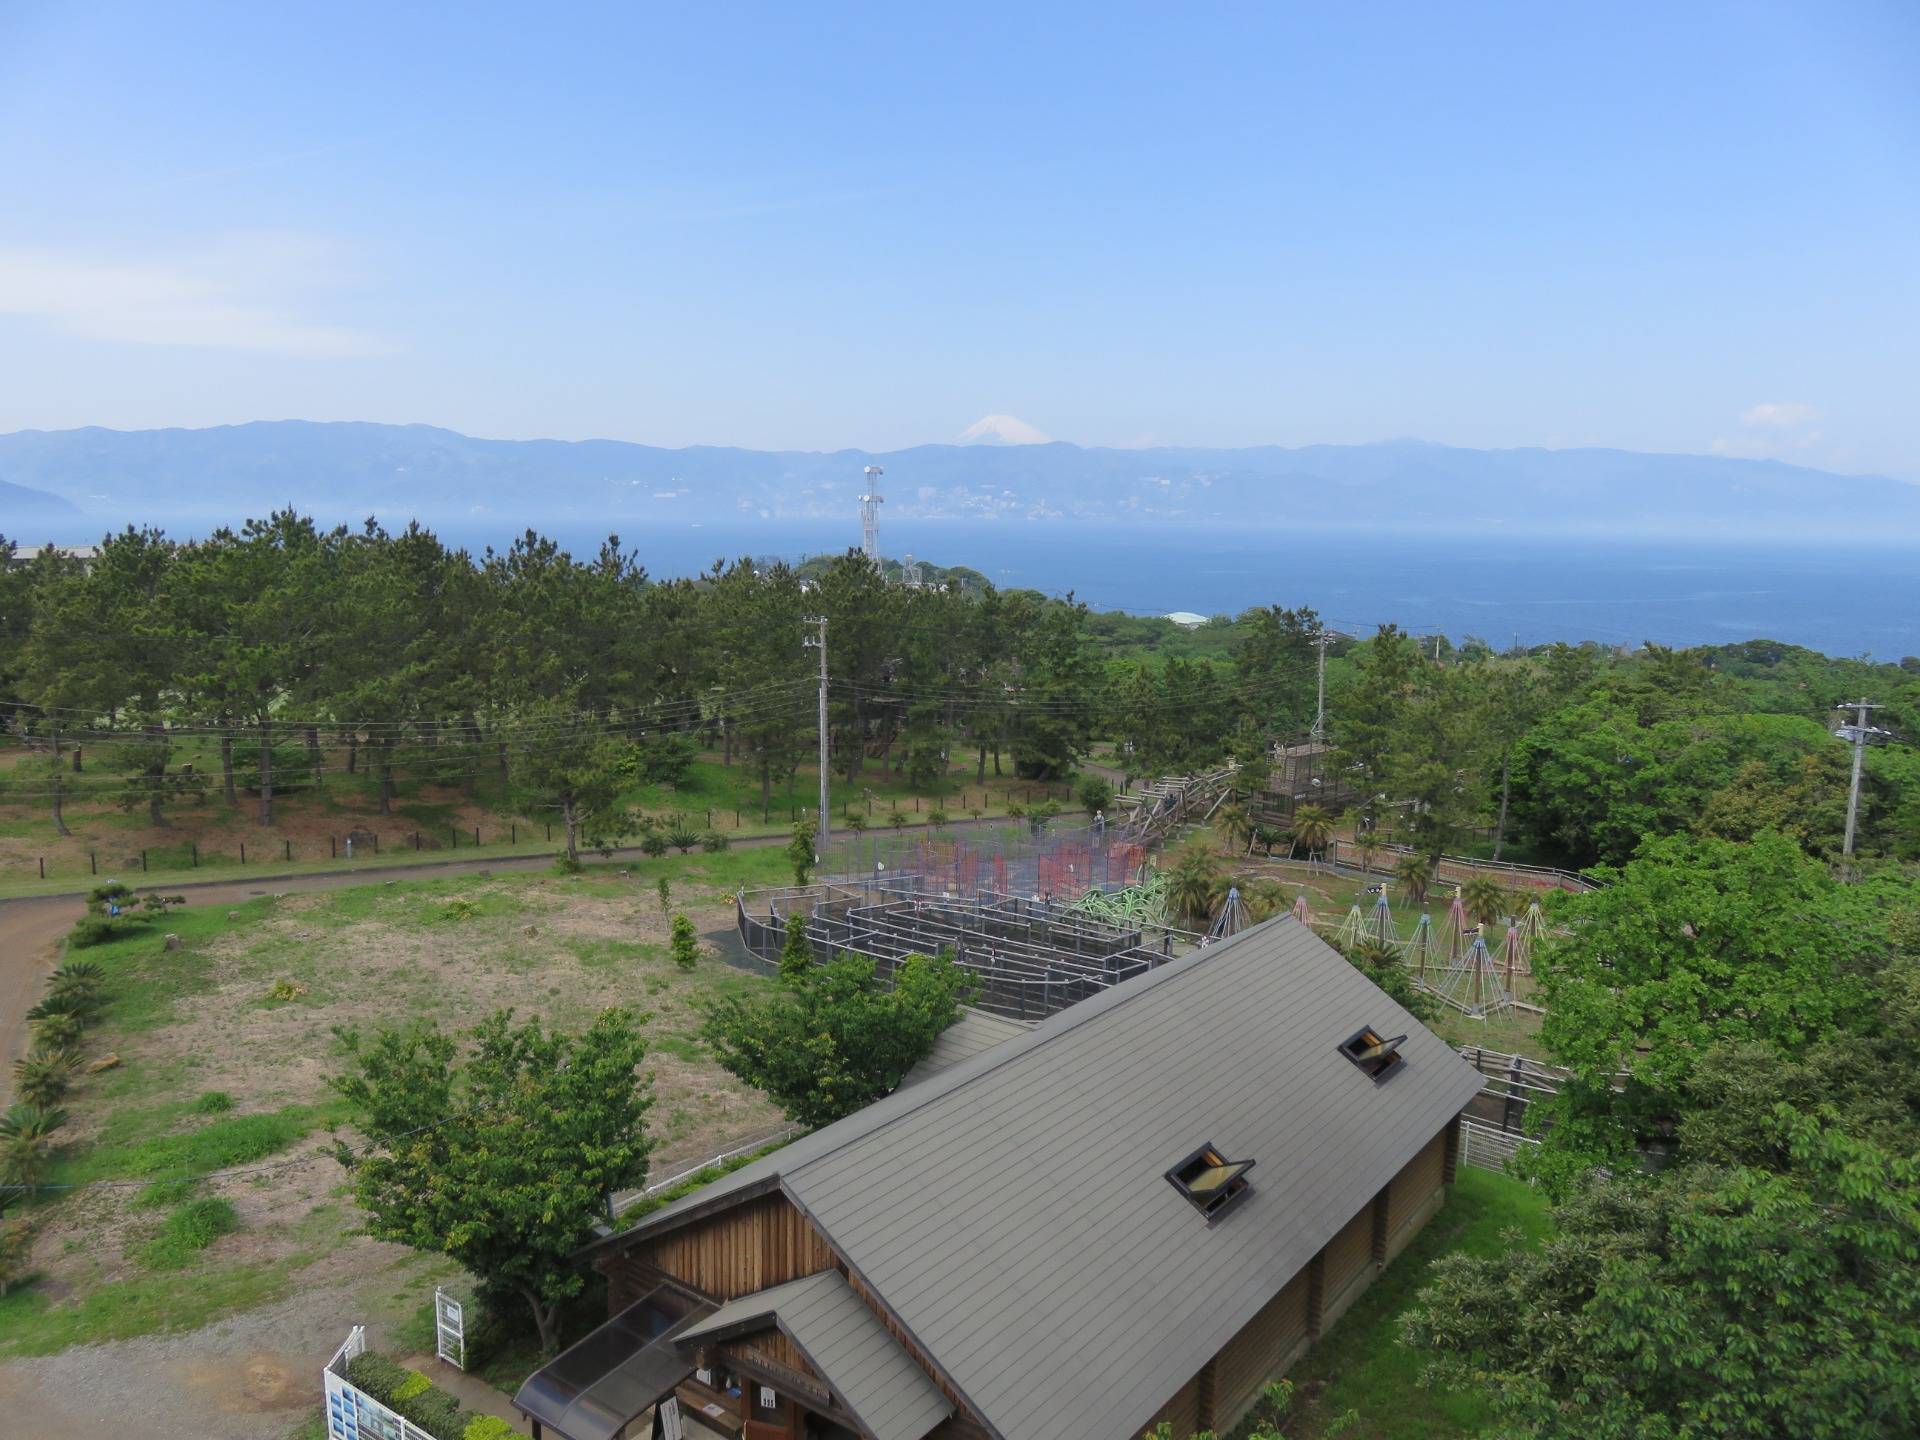 The view to Atami and Mt. Fuji, with the museum and play area in view on the island.